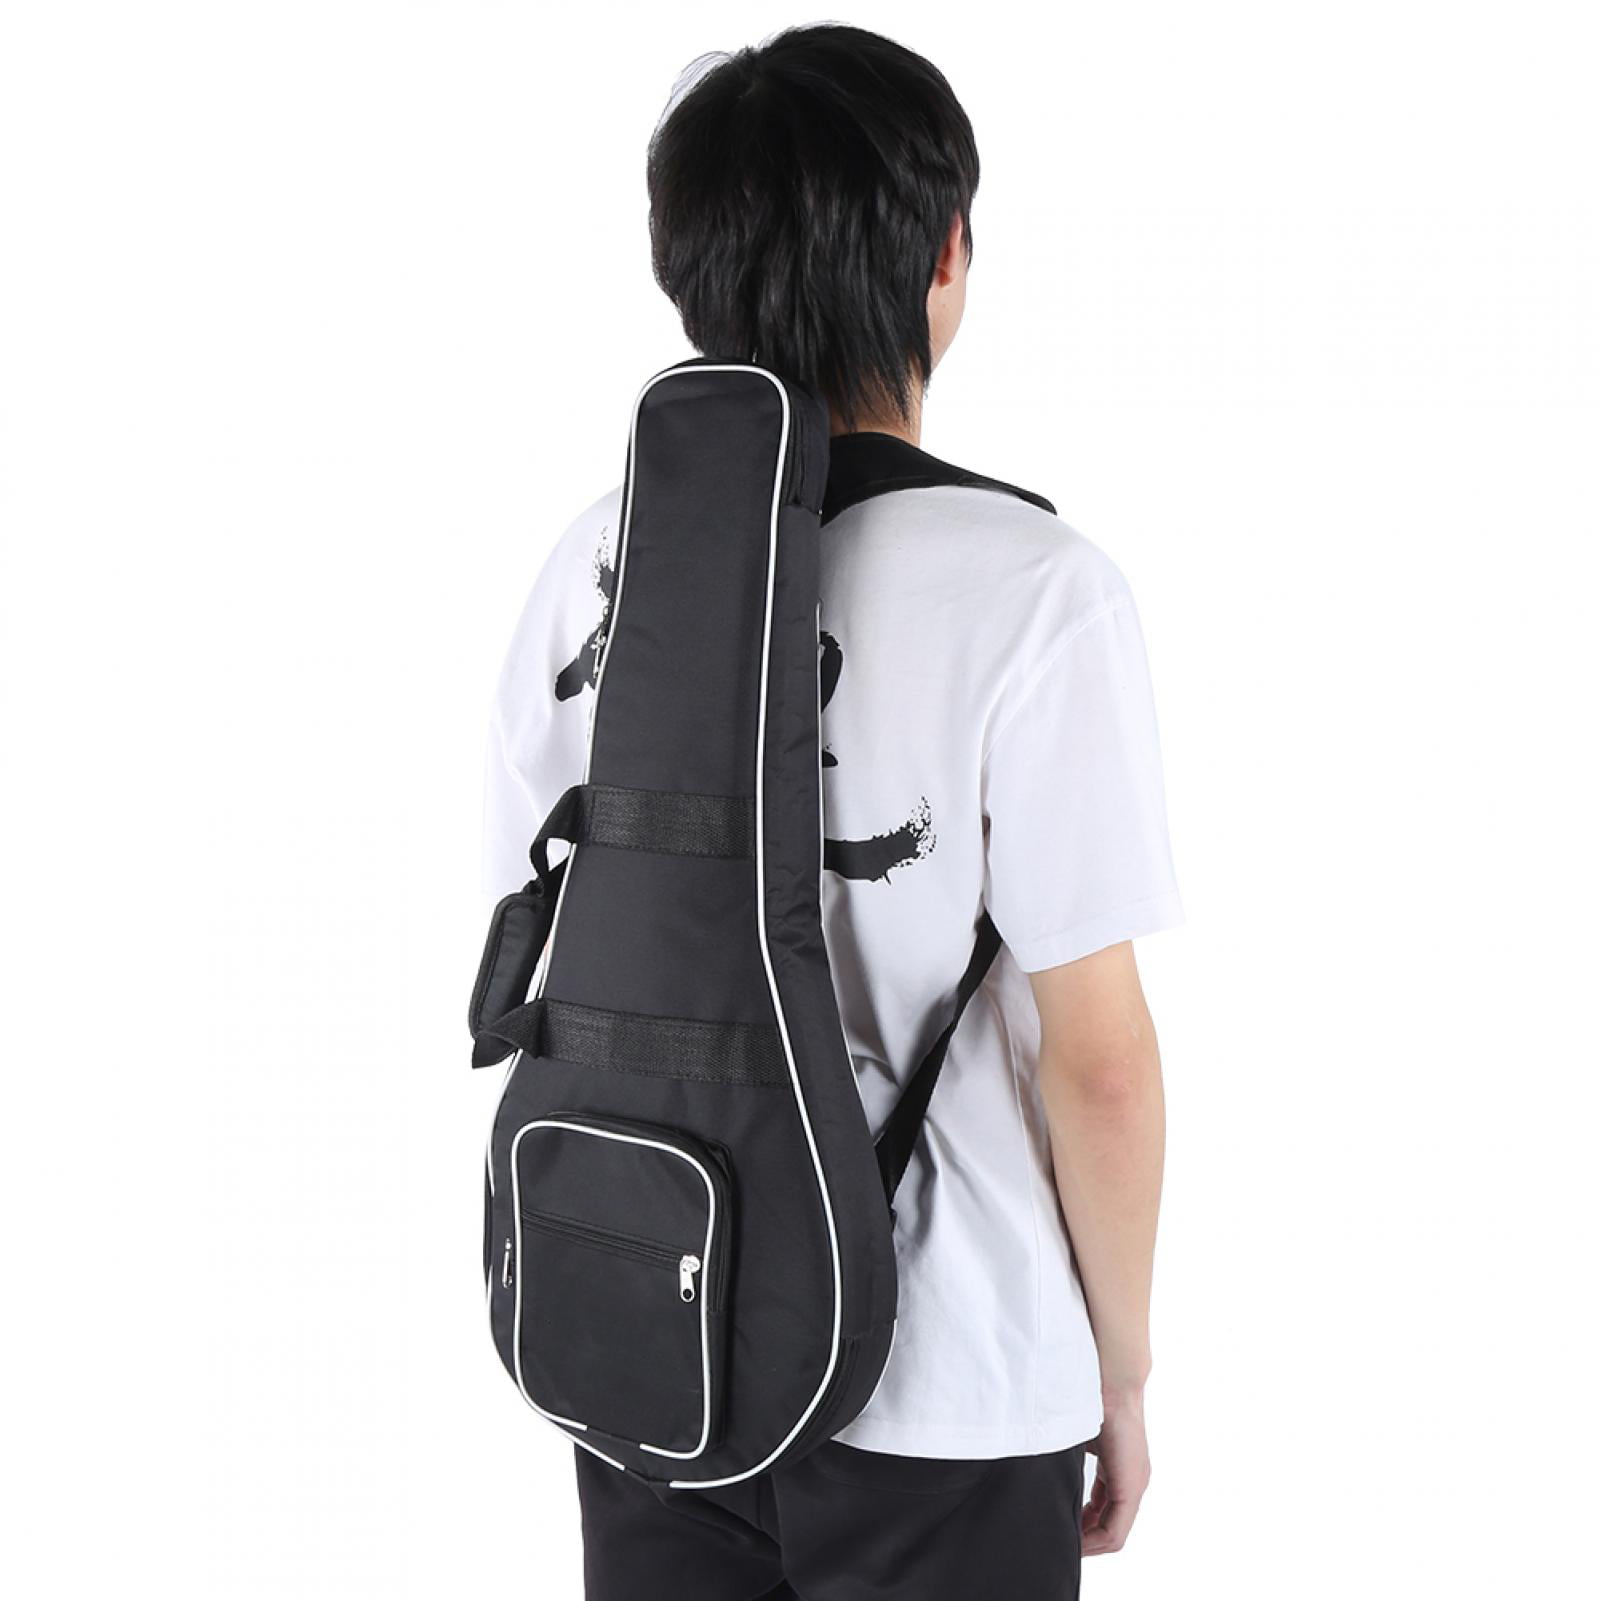 Durable for Strings Music Enthusiast Accessories Music Score High Performance Waterproof Mandolin Bag Mandolin Case 